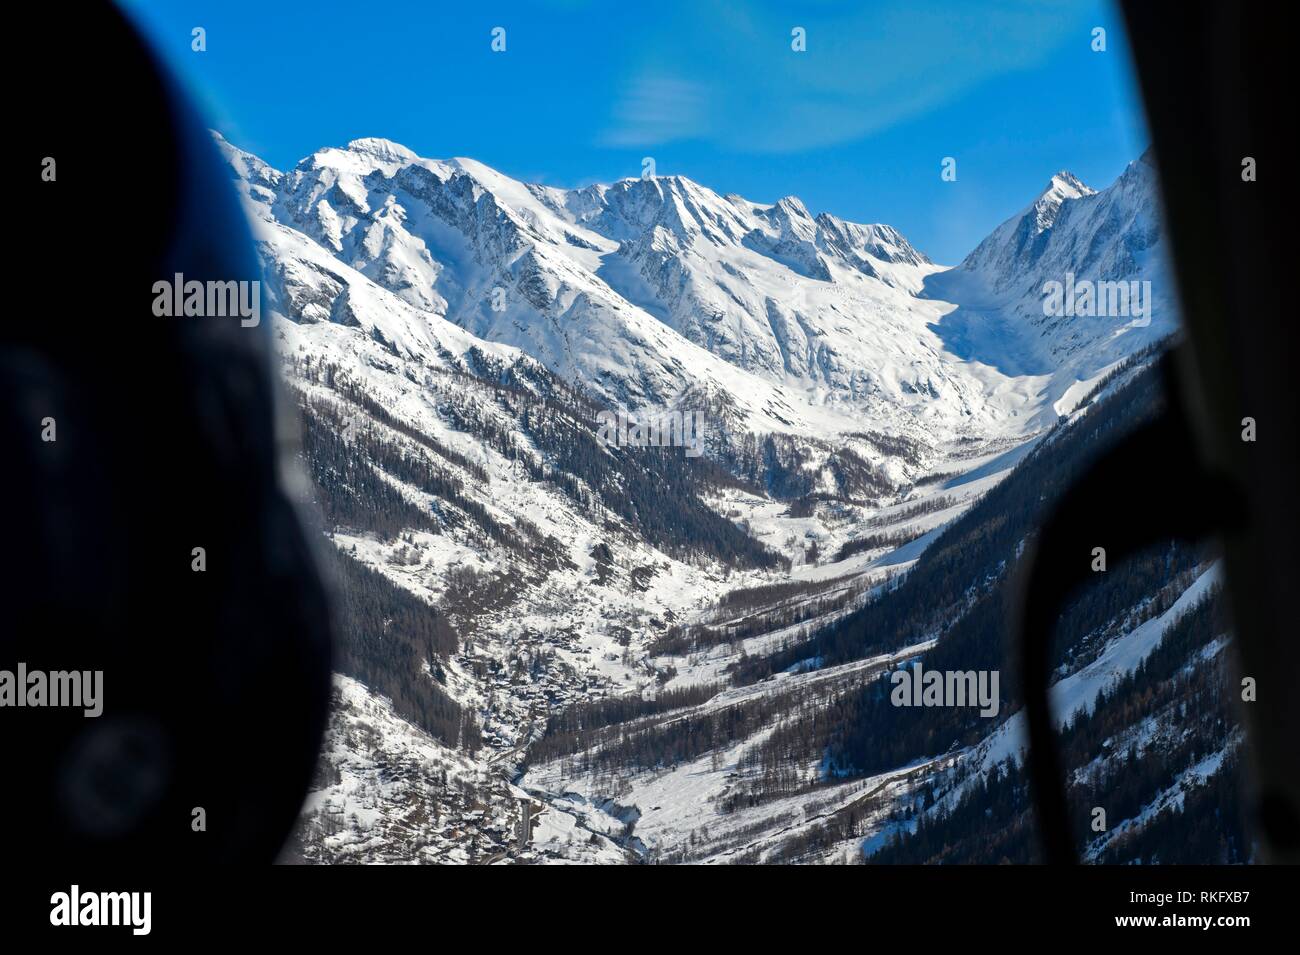 Bird's eye view from a helicopter across the Loetschnetal Valley to the snow-covered peaks of the Bernese Alps, Loetschental, Valais, Switzerland. Stock Photo